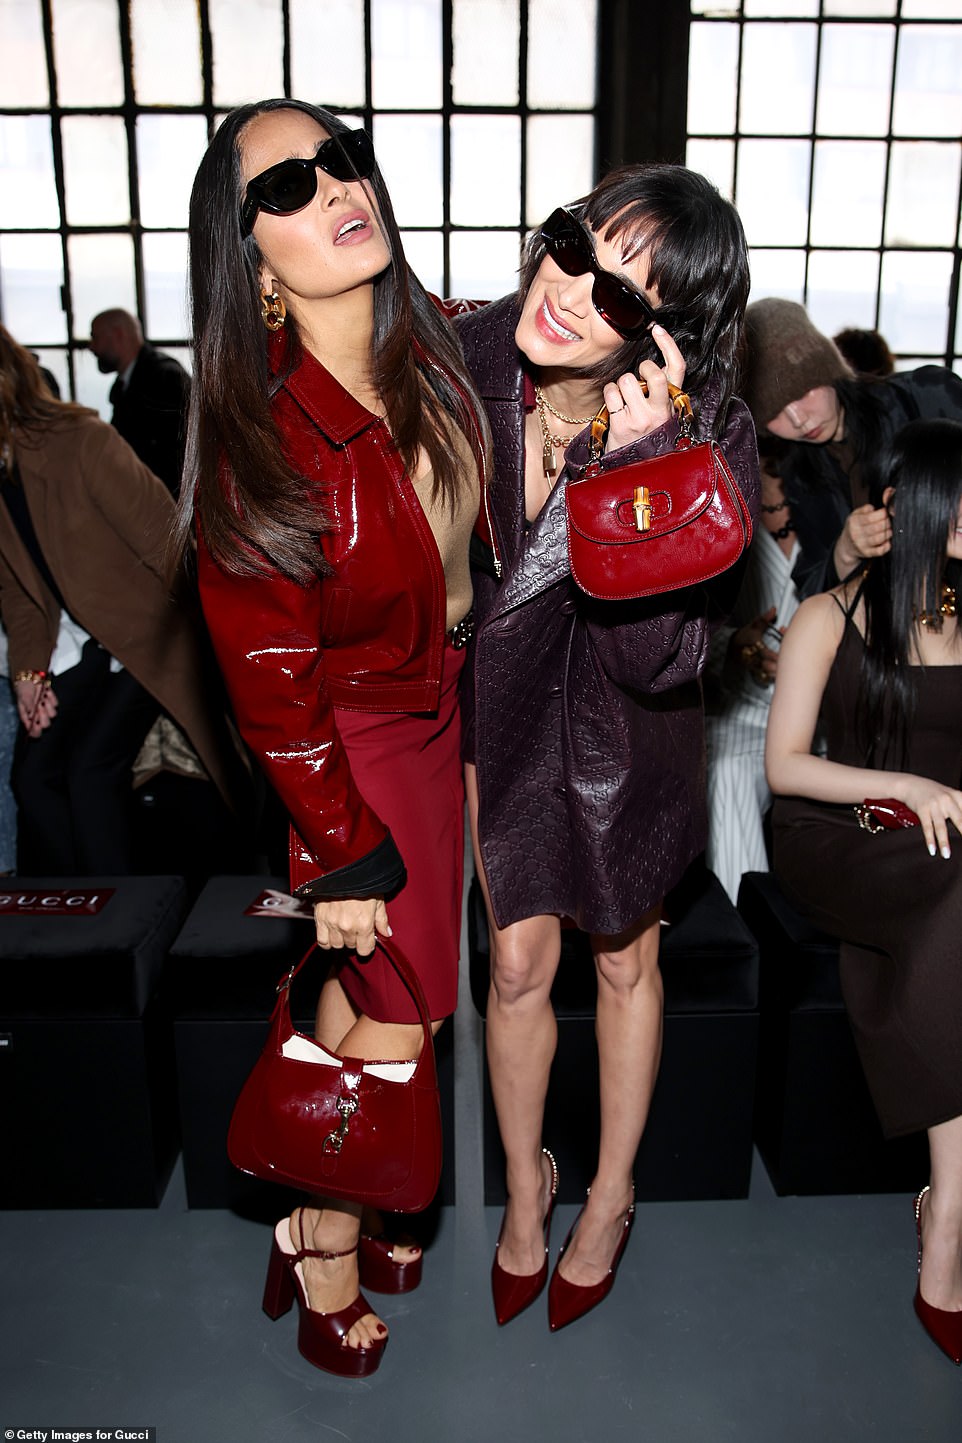 Salma Hayek and Sofia Boutella looked sensational as they posed together